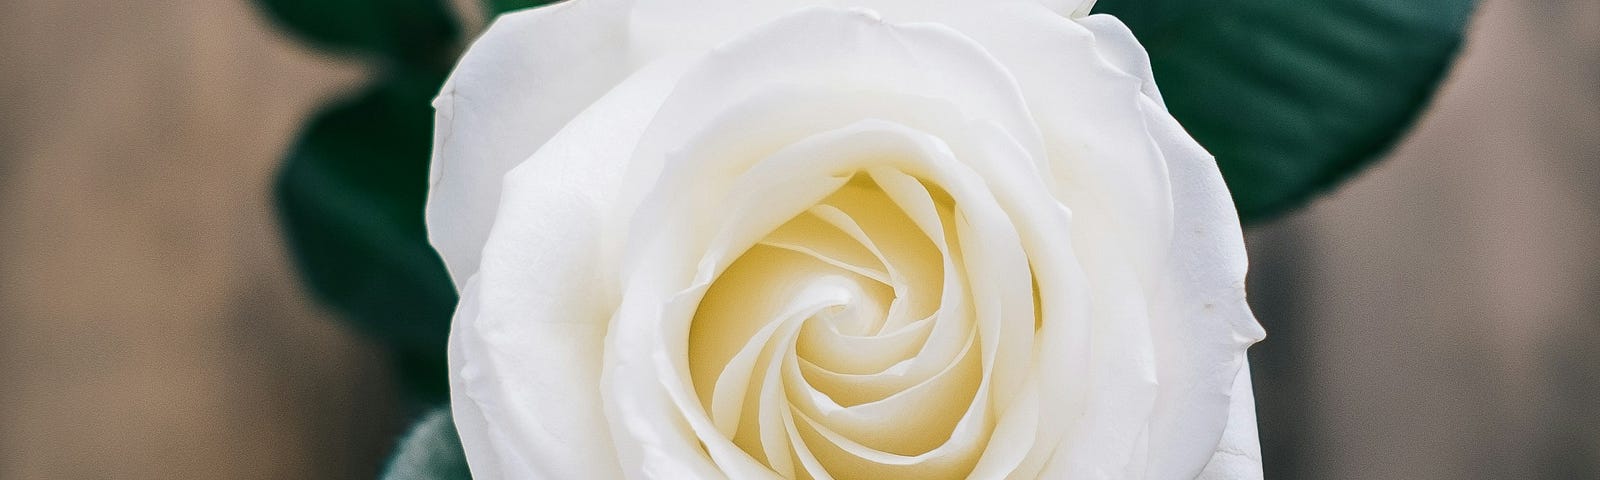 White rose. Still. No wanting. Just being. Surrender and be free.